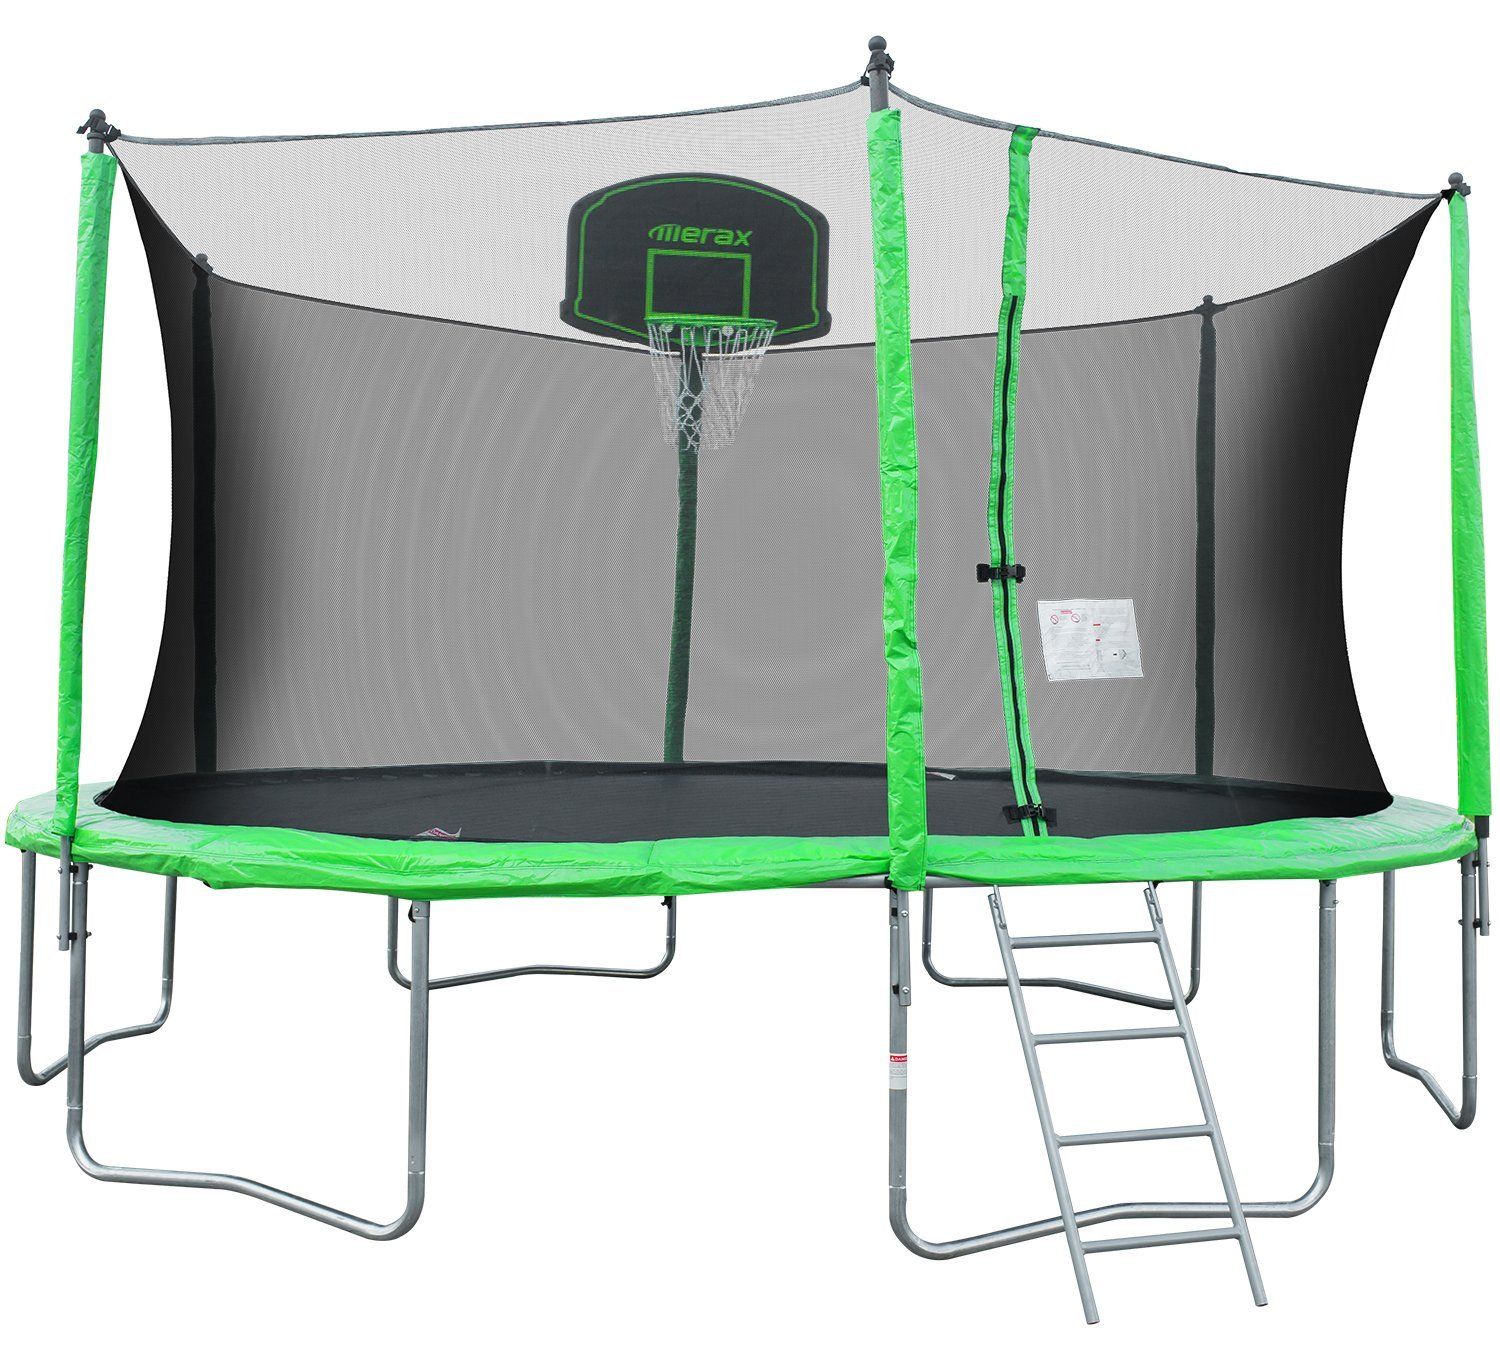 Merax 14-Feet Round Trampoline with Safety Enclosure, Basketball Hoop and Ladder